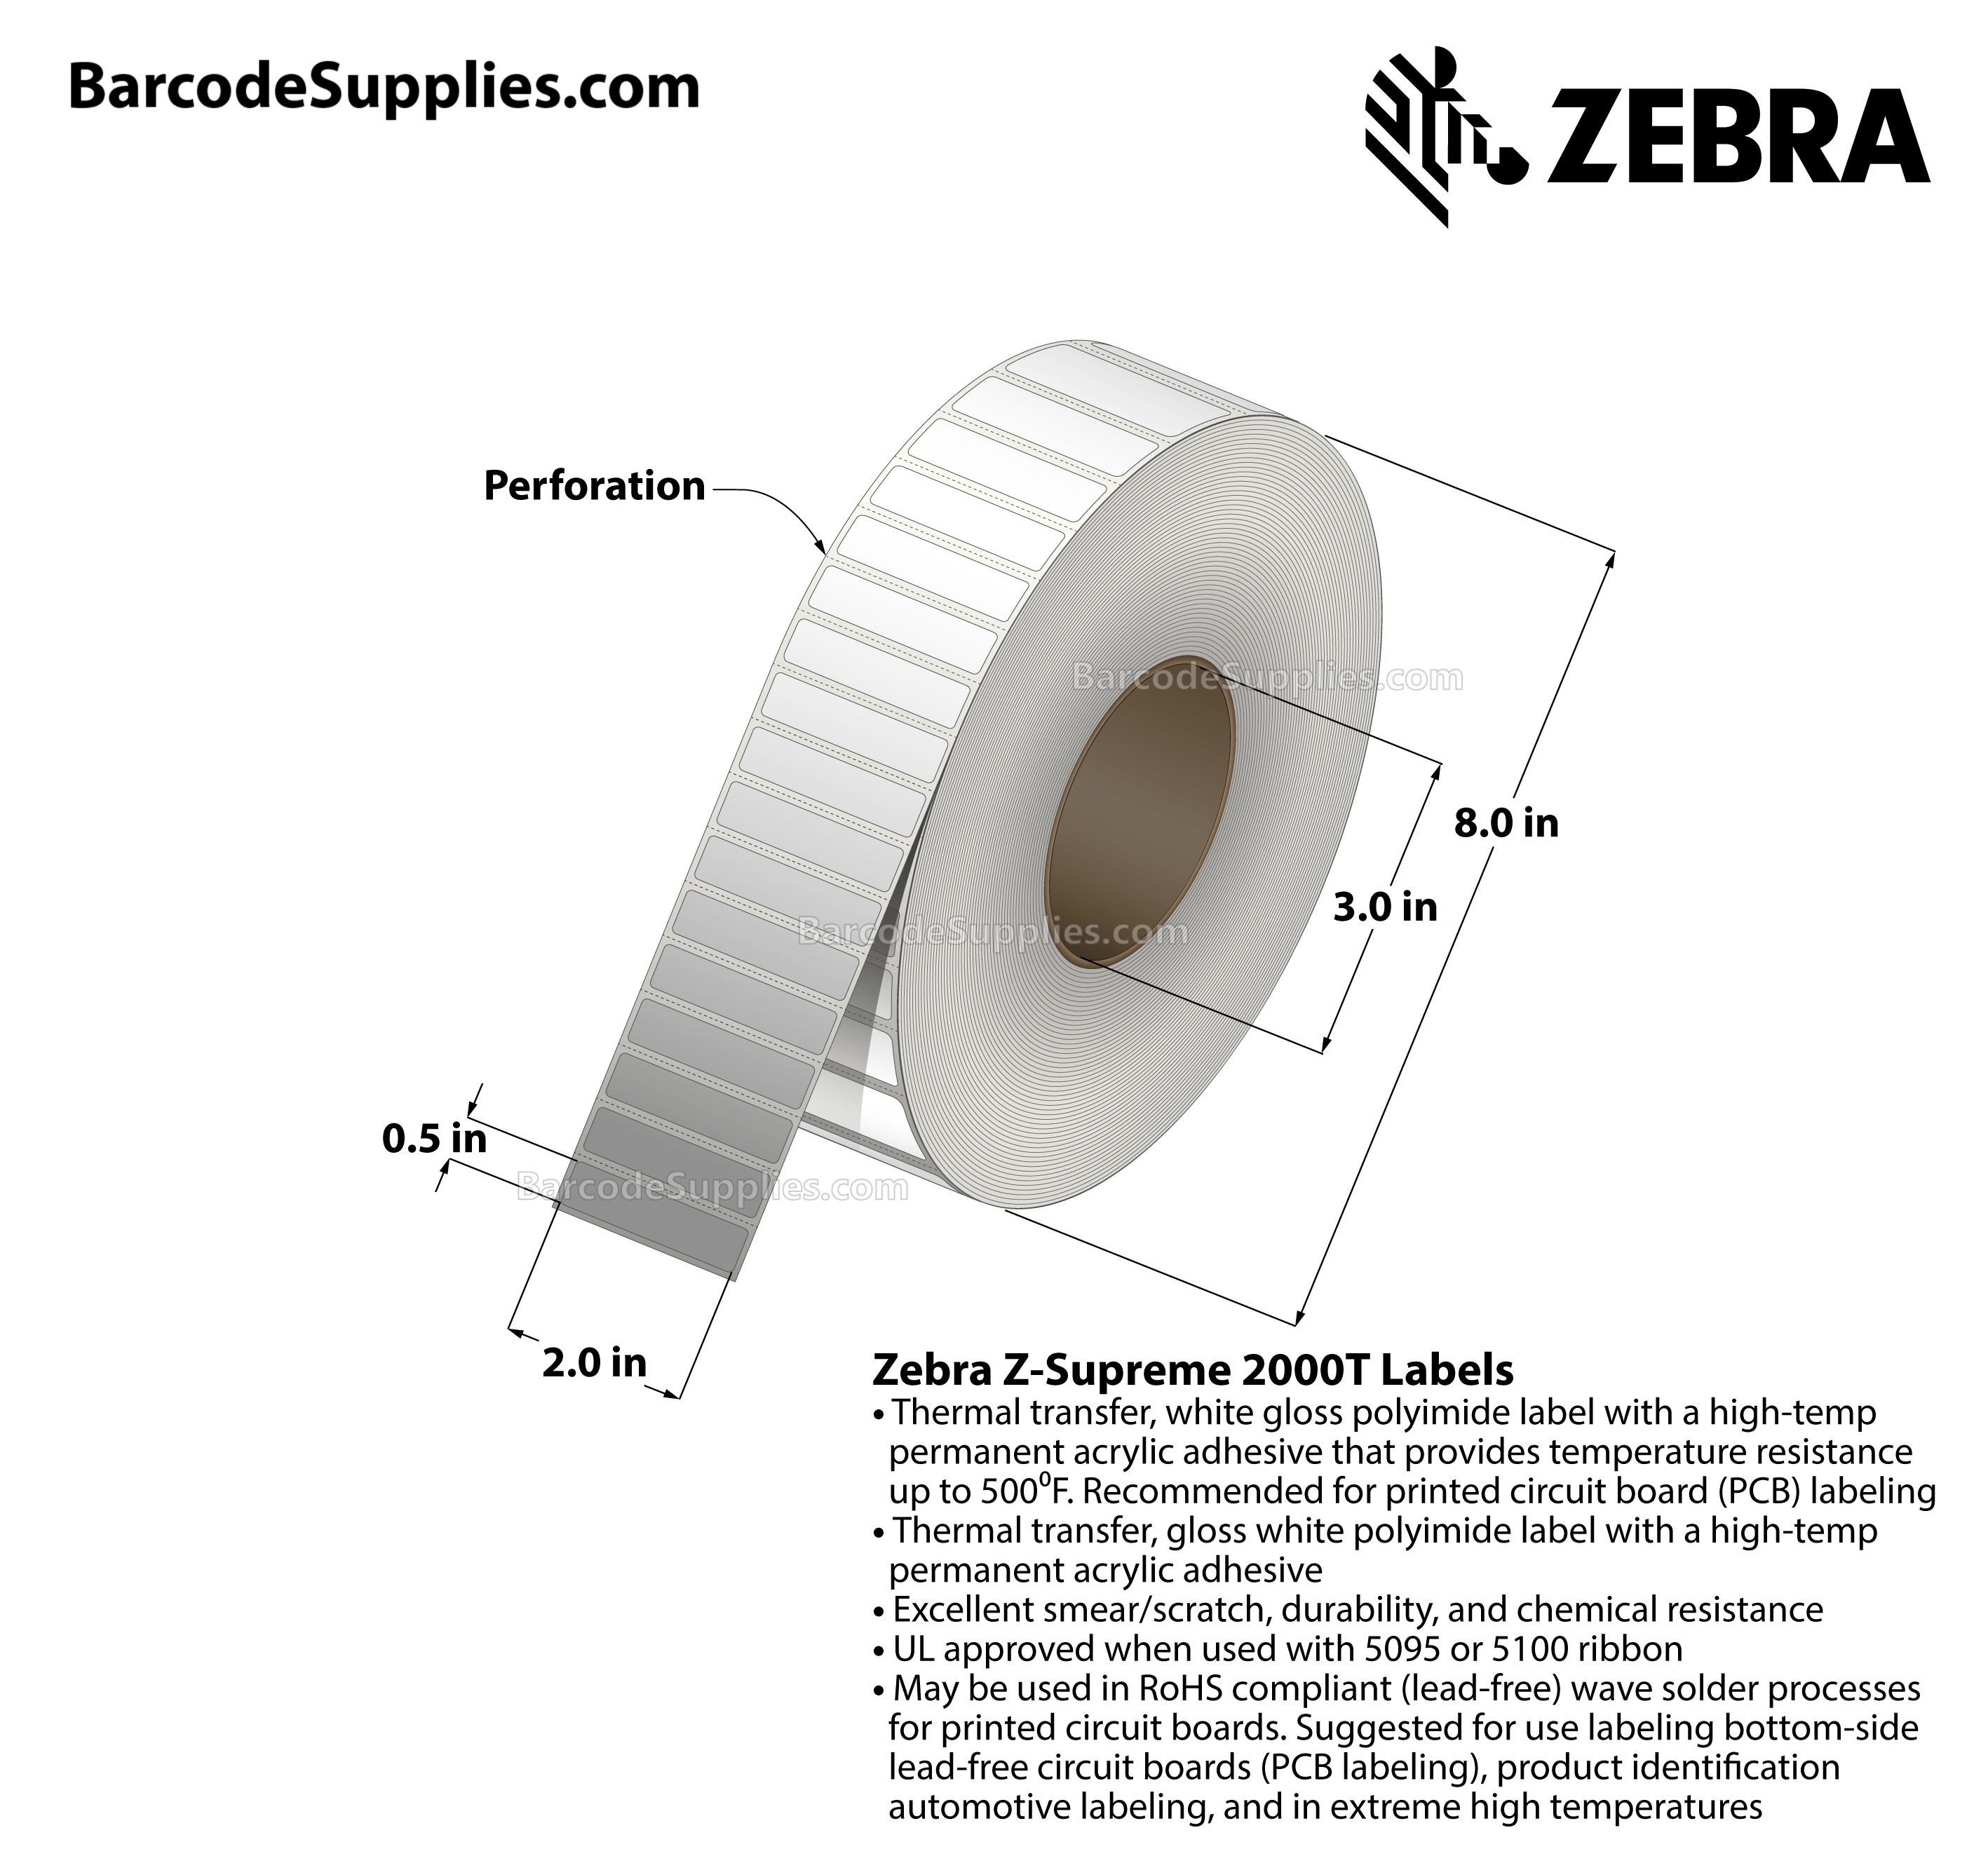 2 x 0.5 Thermal Transfer White Z-Perform 2000T Labels With Permanent Adhesive - Perforated - 3000 Labels Per Roll - Carton Of 4 Rolls - 12000 Labels Total - MPN: 10022942